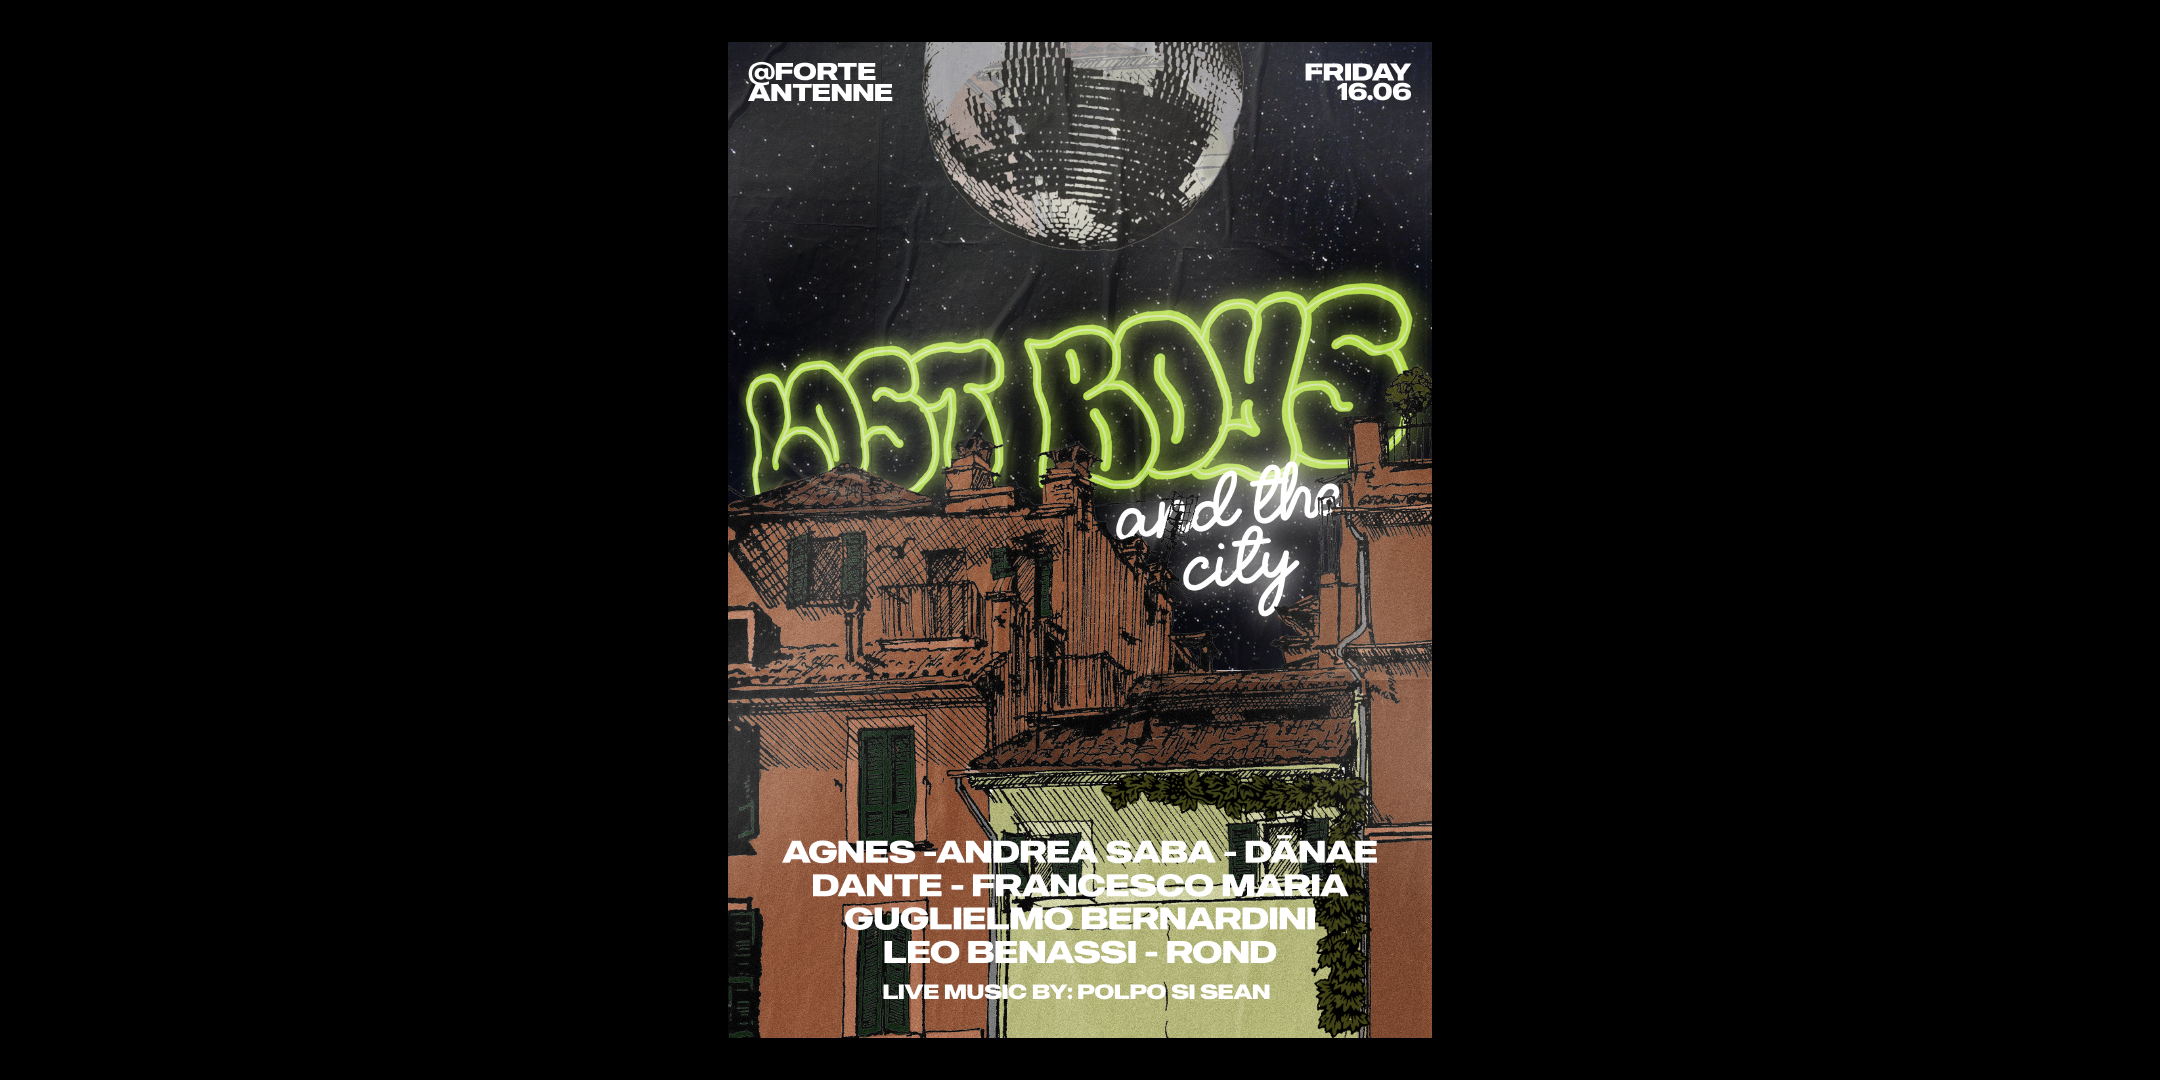 Lost Boys and the City - Página frontal